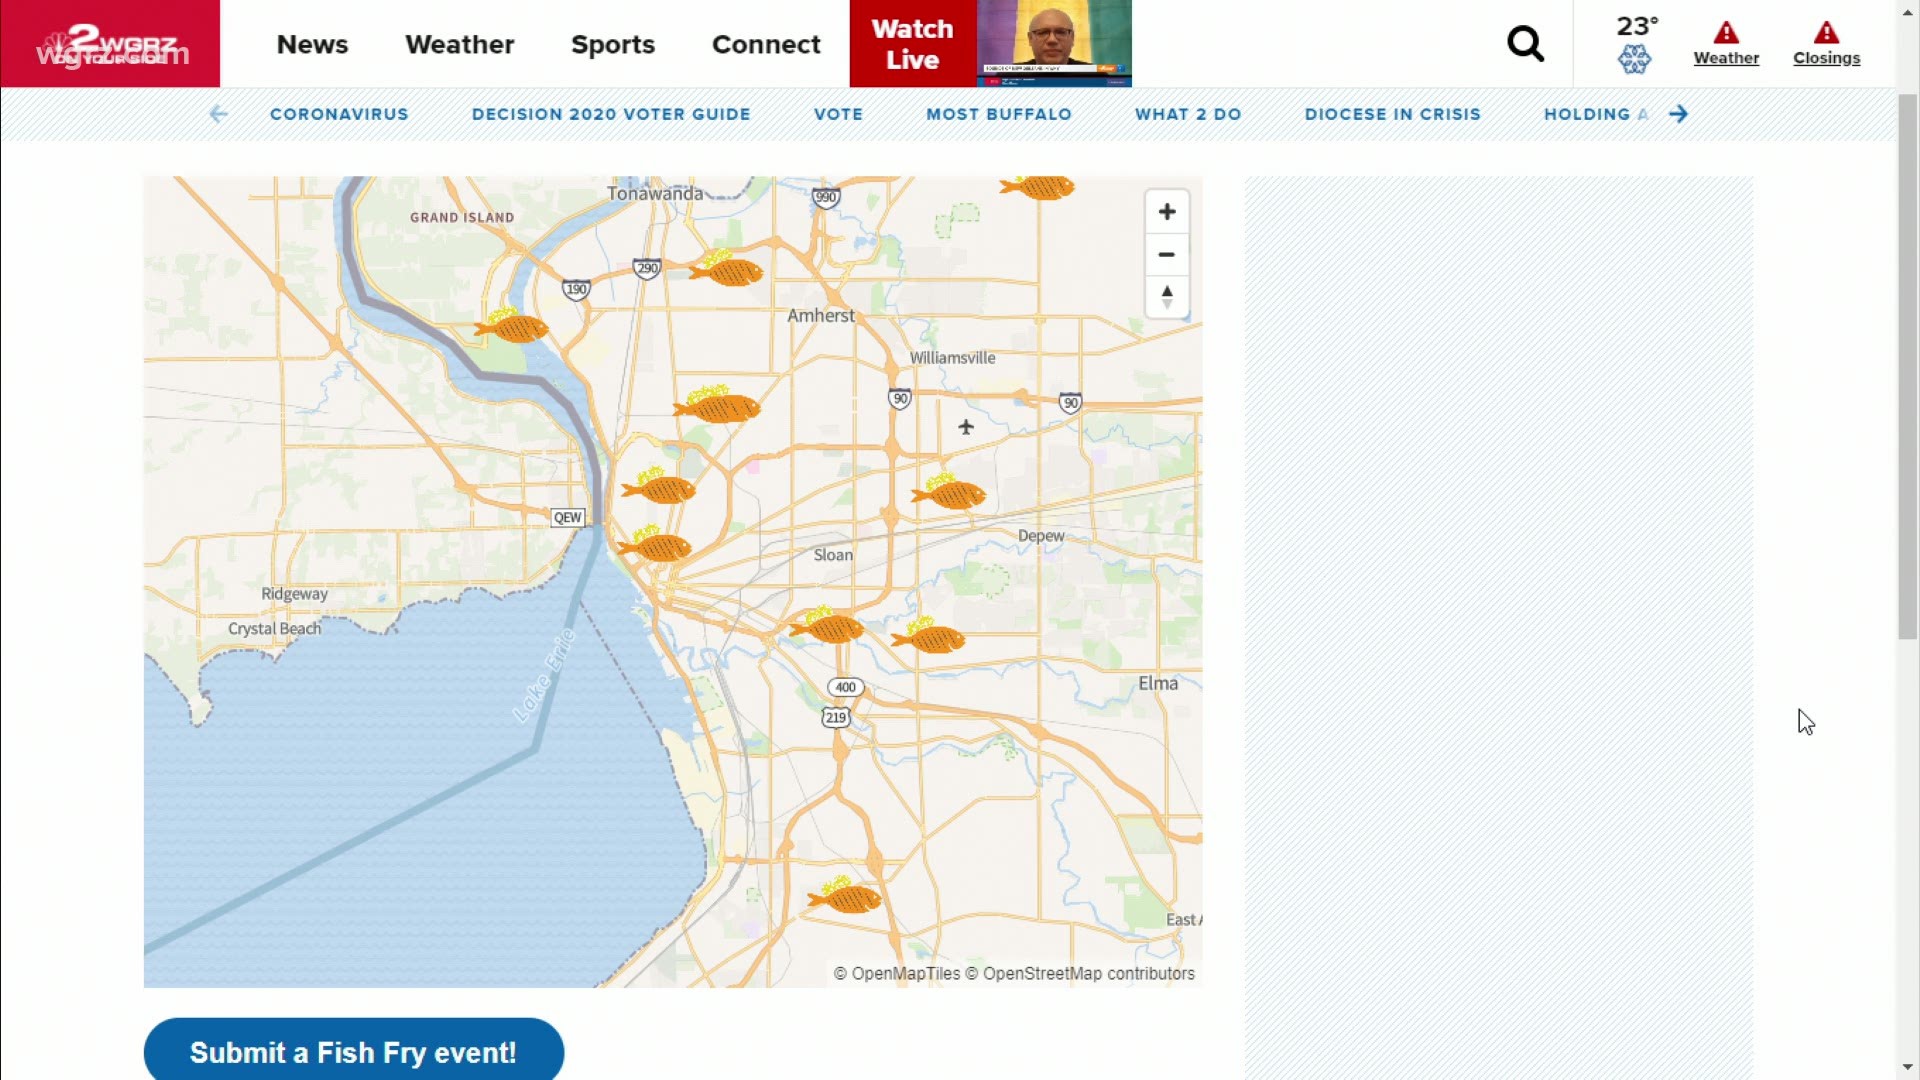 You can check out the Fish Fry map at https://www.wgrz.com/fishfry.